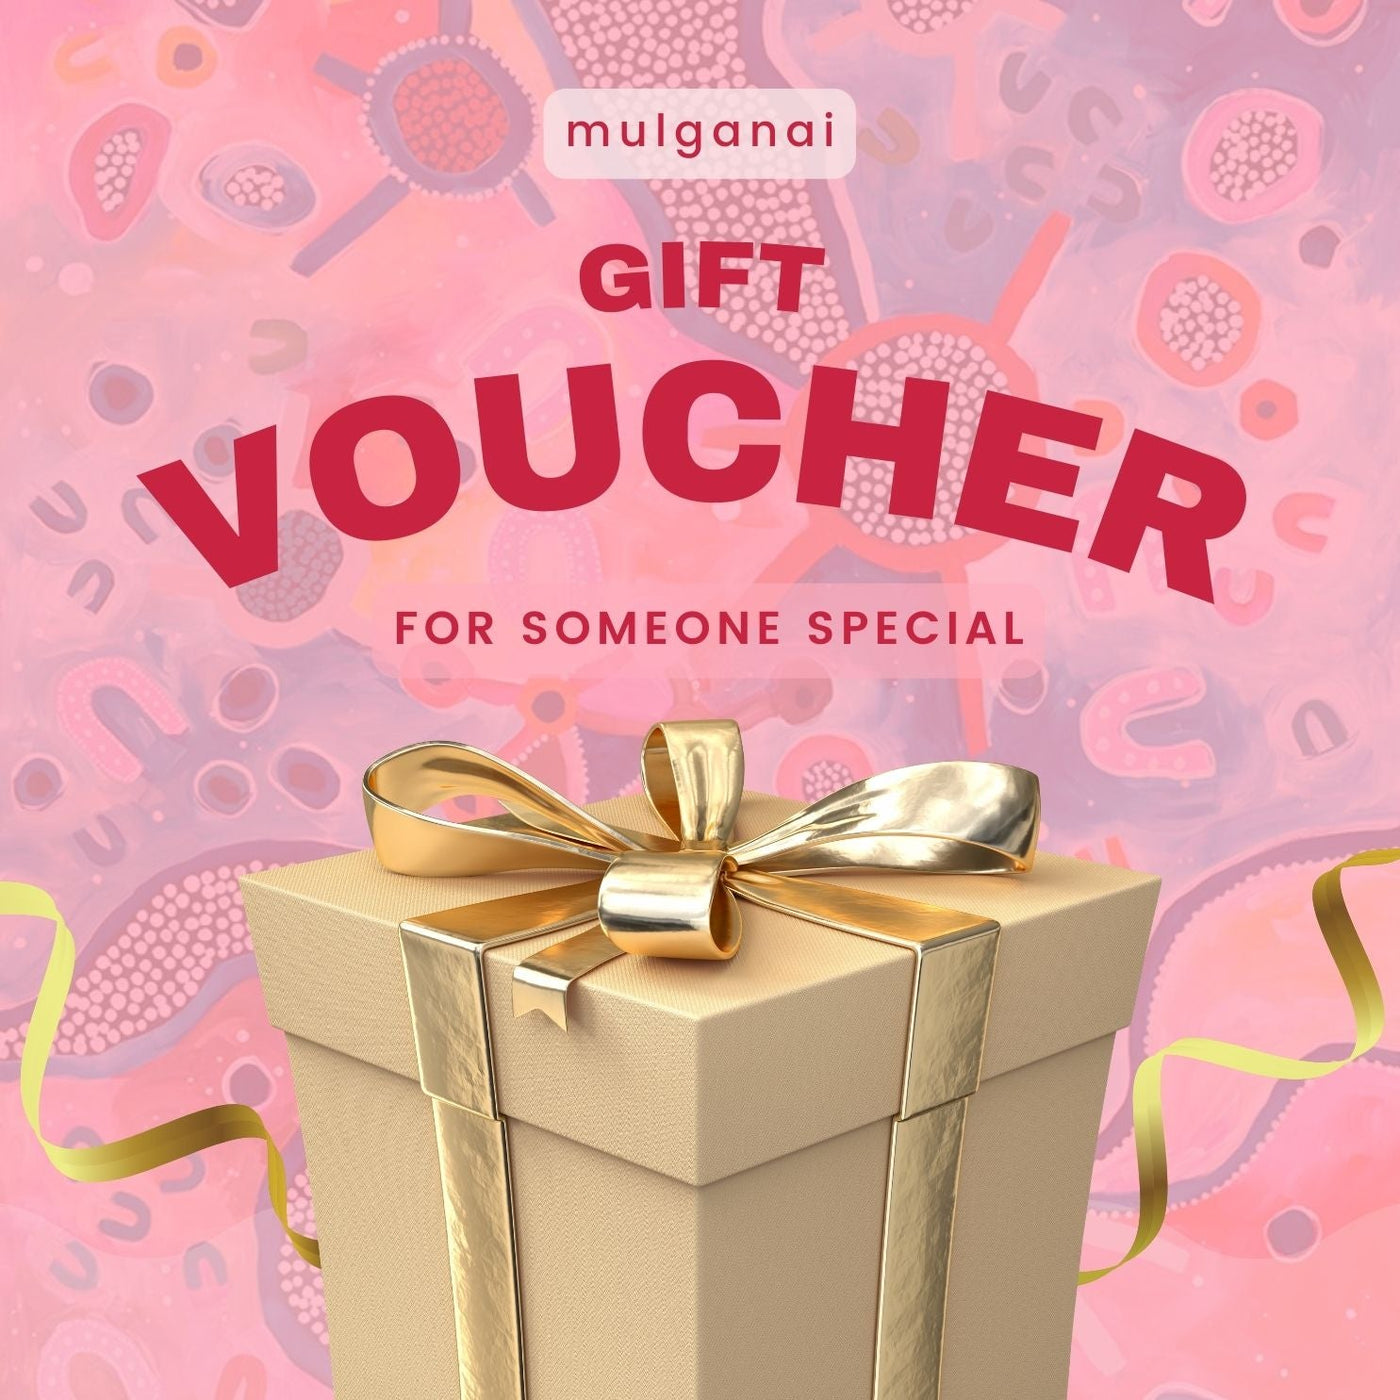 Mulganai Gift Voucher,Gift Cards,Mulganai,Indigenous canvas and print art, Gift Cards for SALE